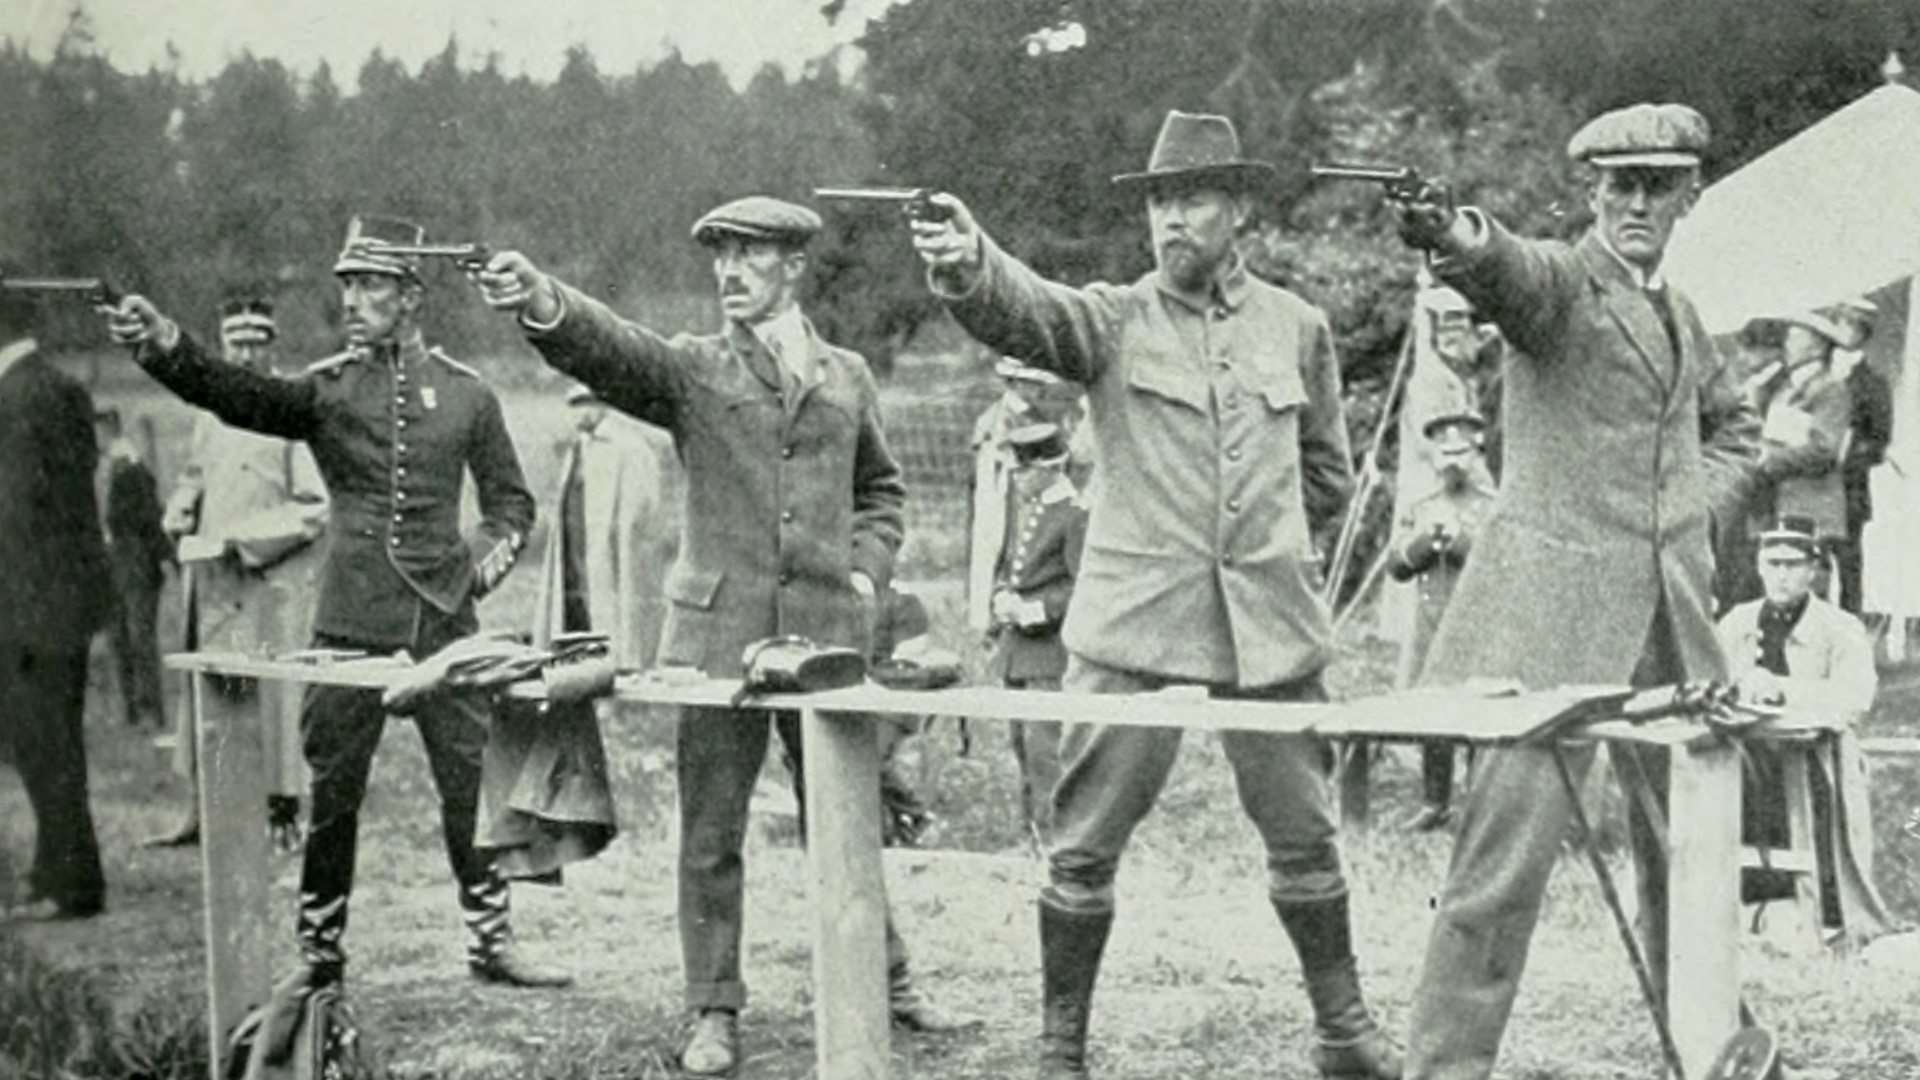 Swedish 50-meter free pistol team at the 1912 Olympic Games